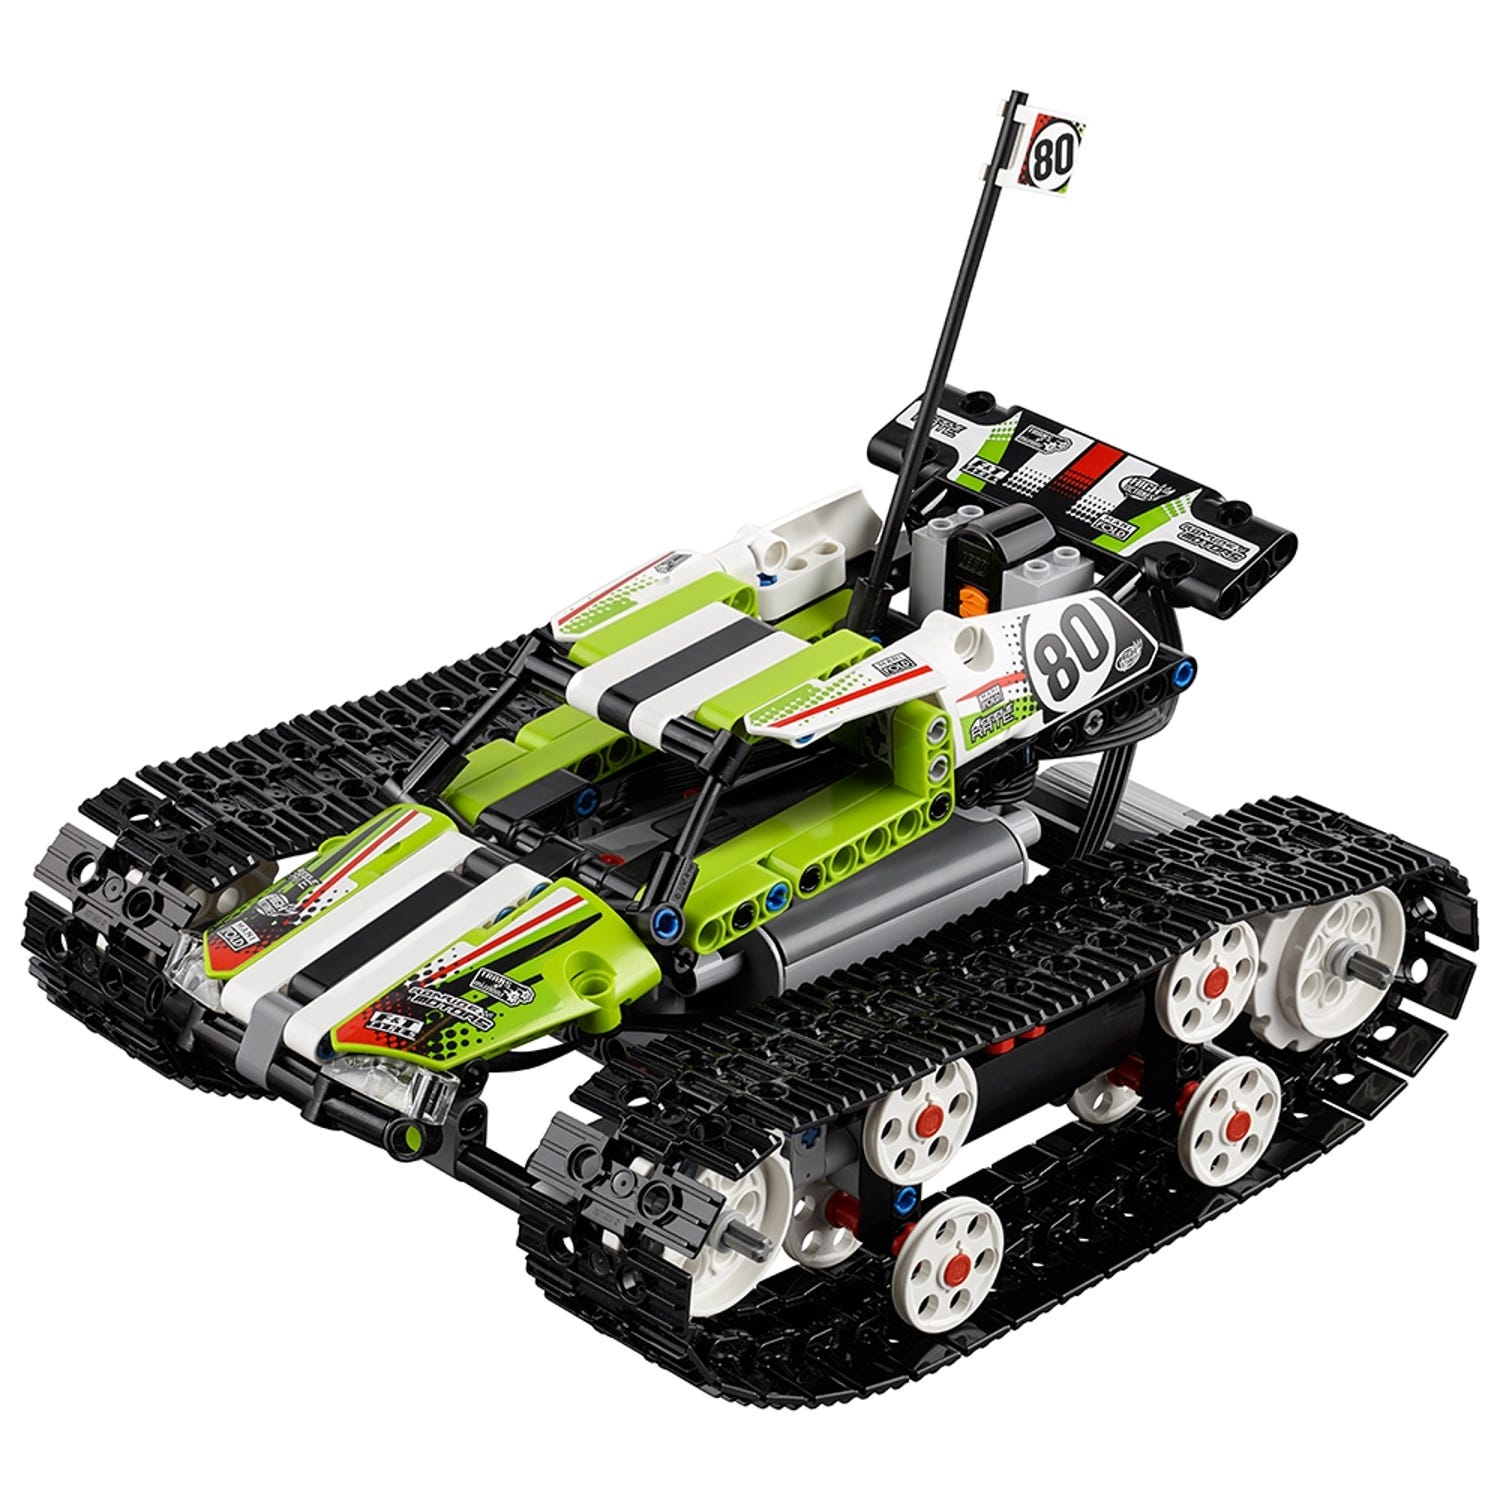 besked Perpetual jøde RC Tracked Racer 42065 | Technic™ | Buy online at the Official LEGO® Shop US